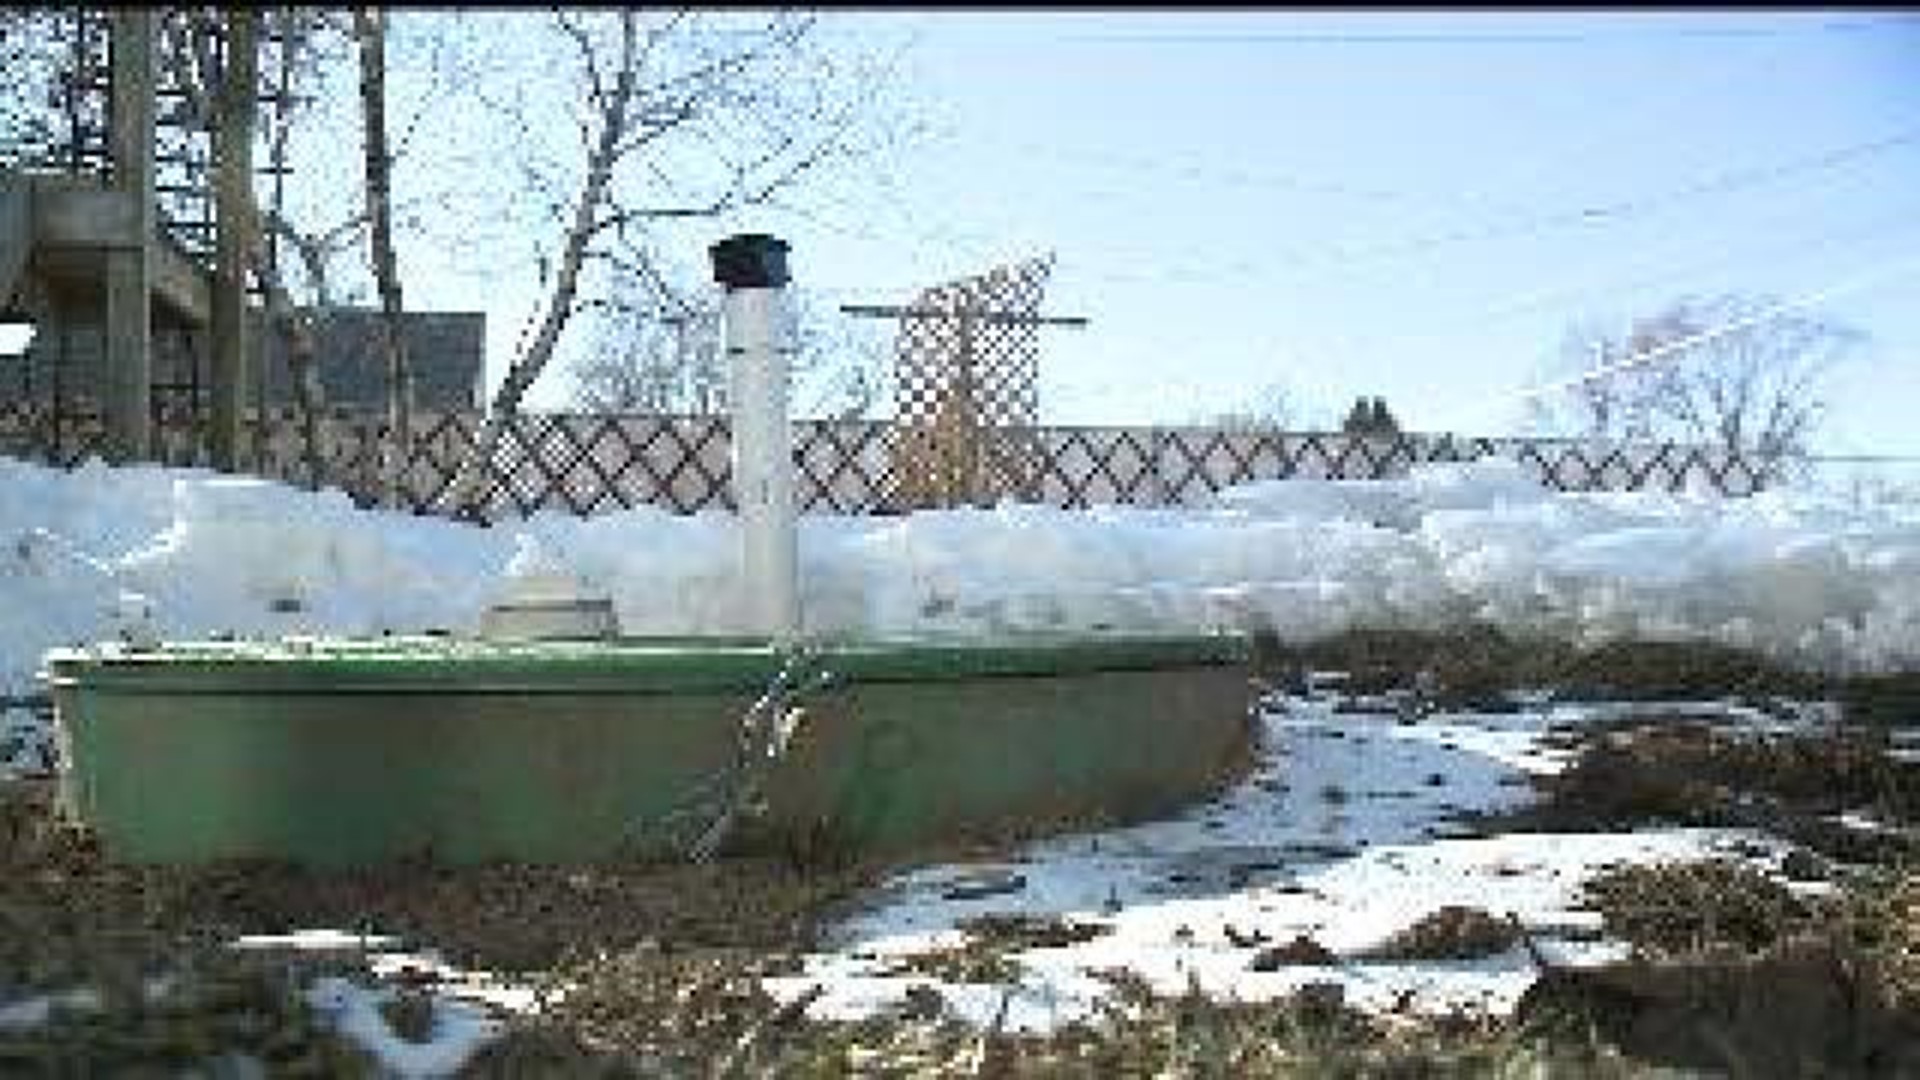 East Moline Sewer Problems